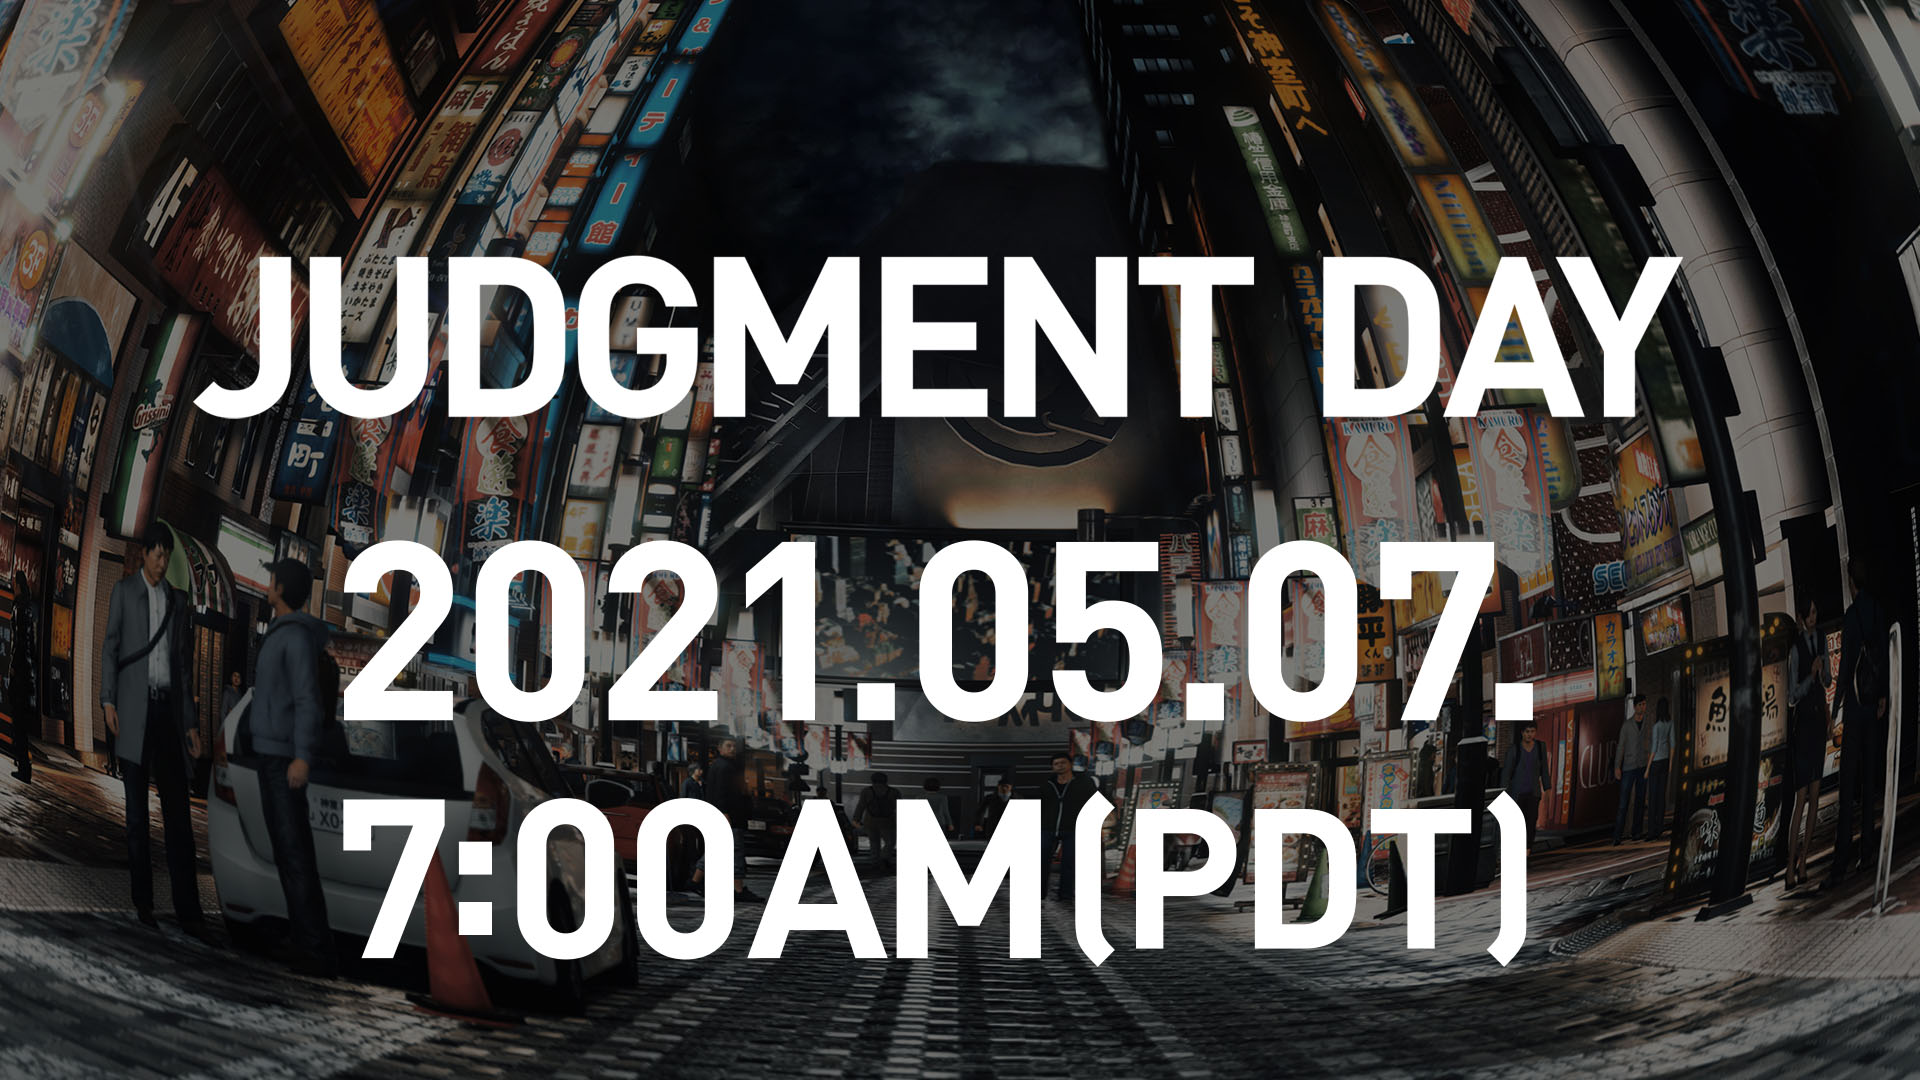 Judgment Day Teaser Site 04 23 21 1